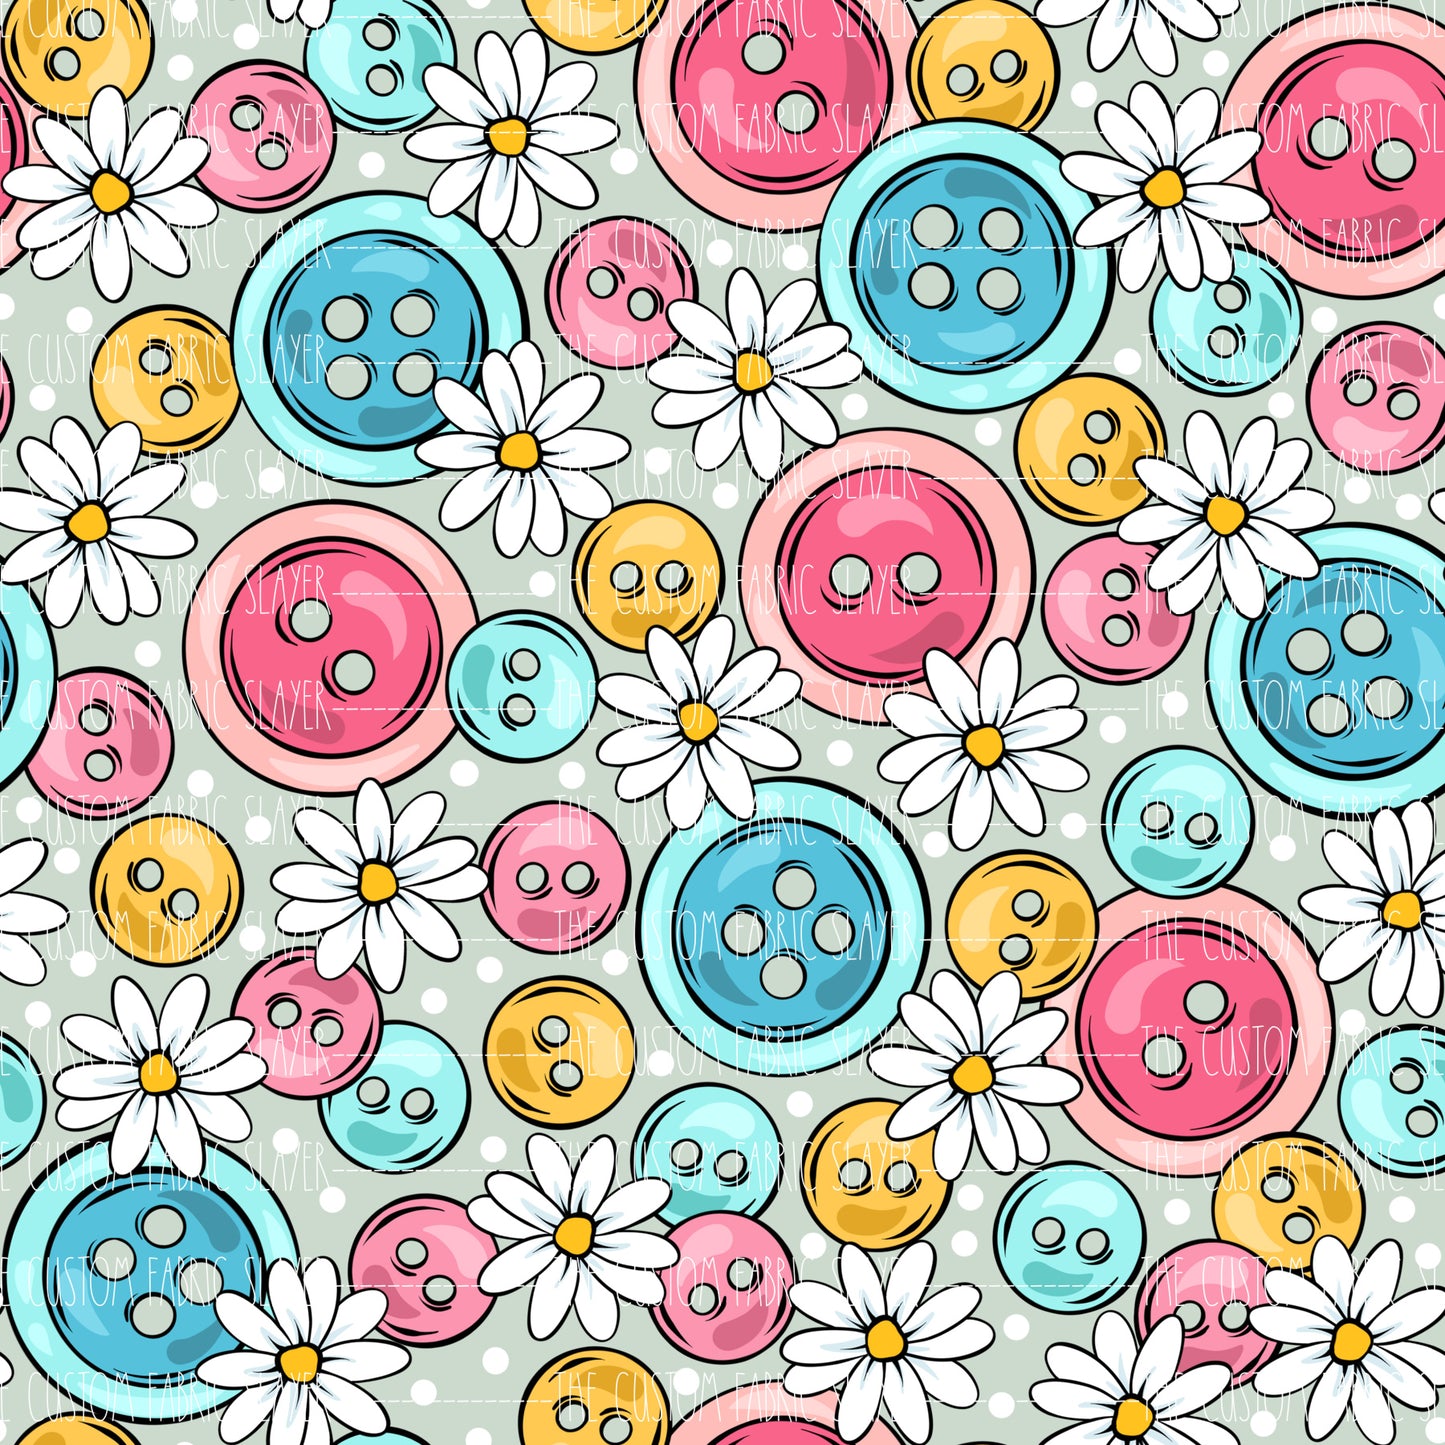 Bright Buttons - EVERBLOOMDESIGNS